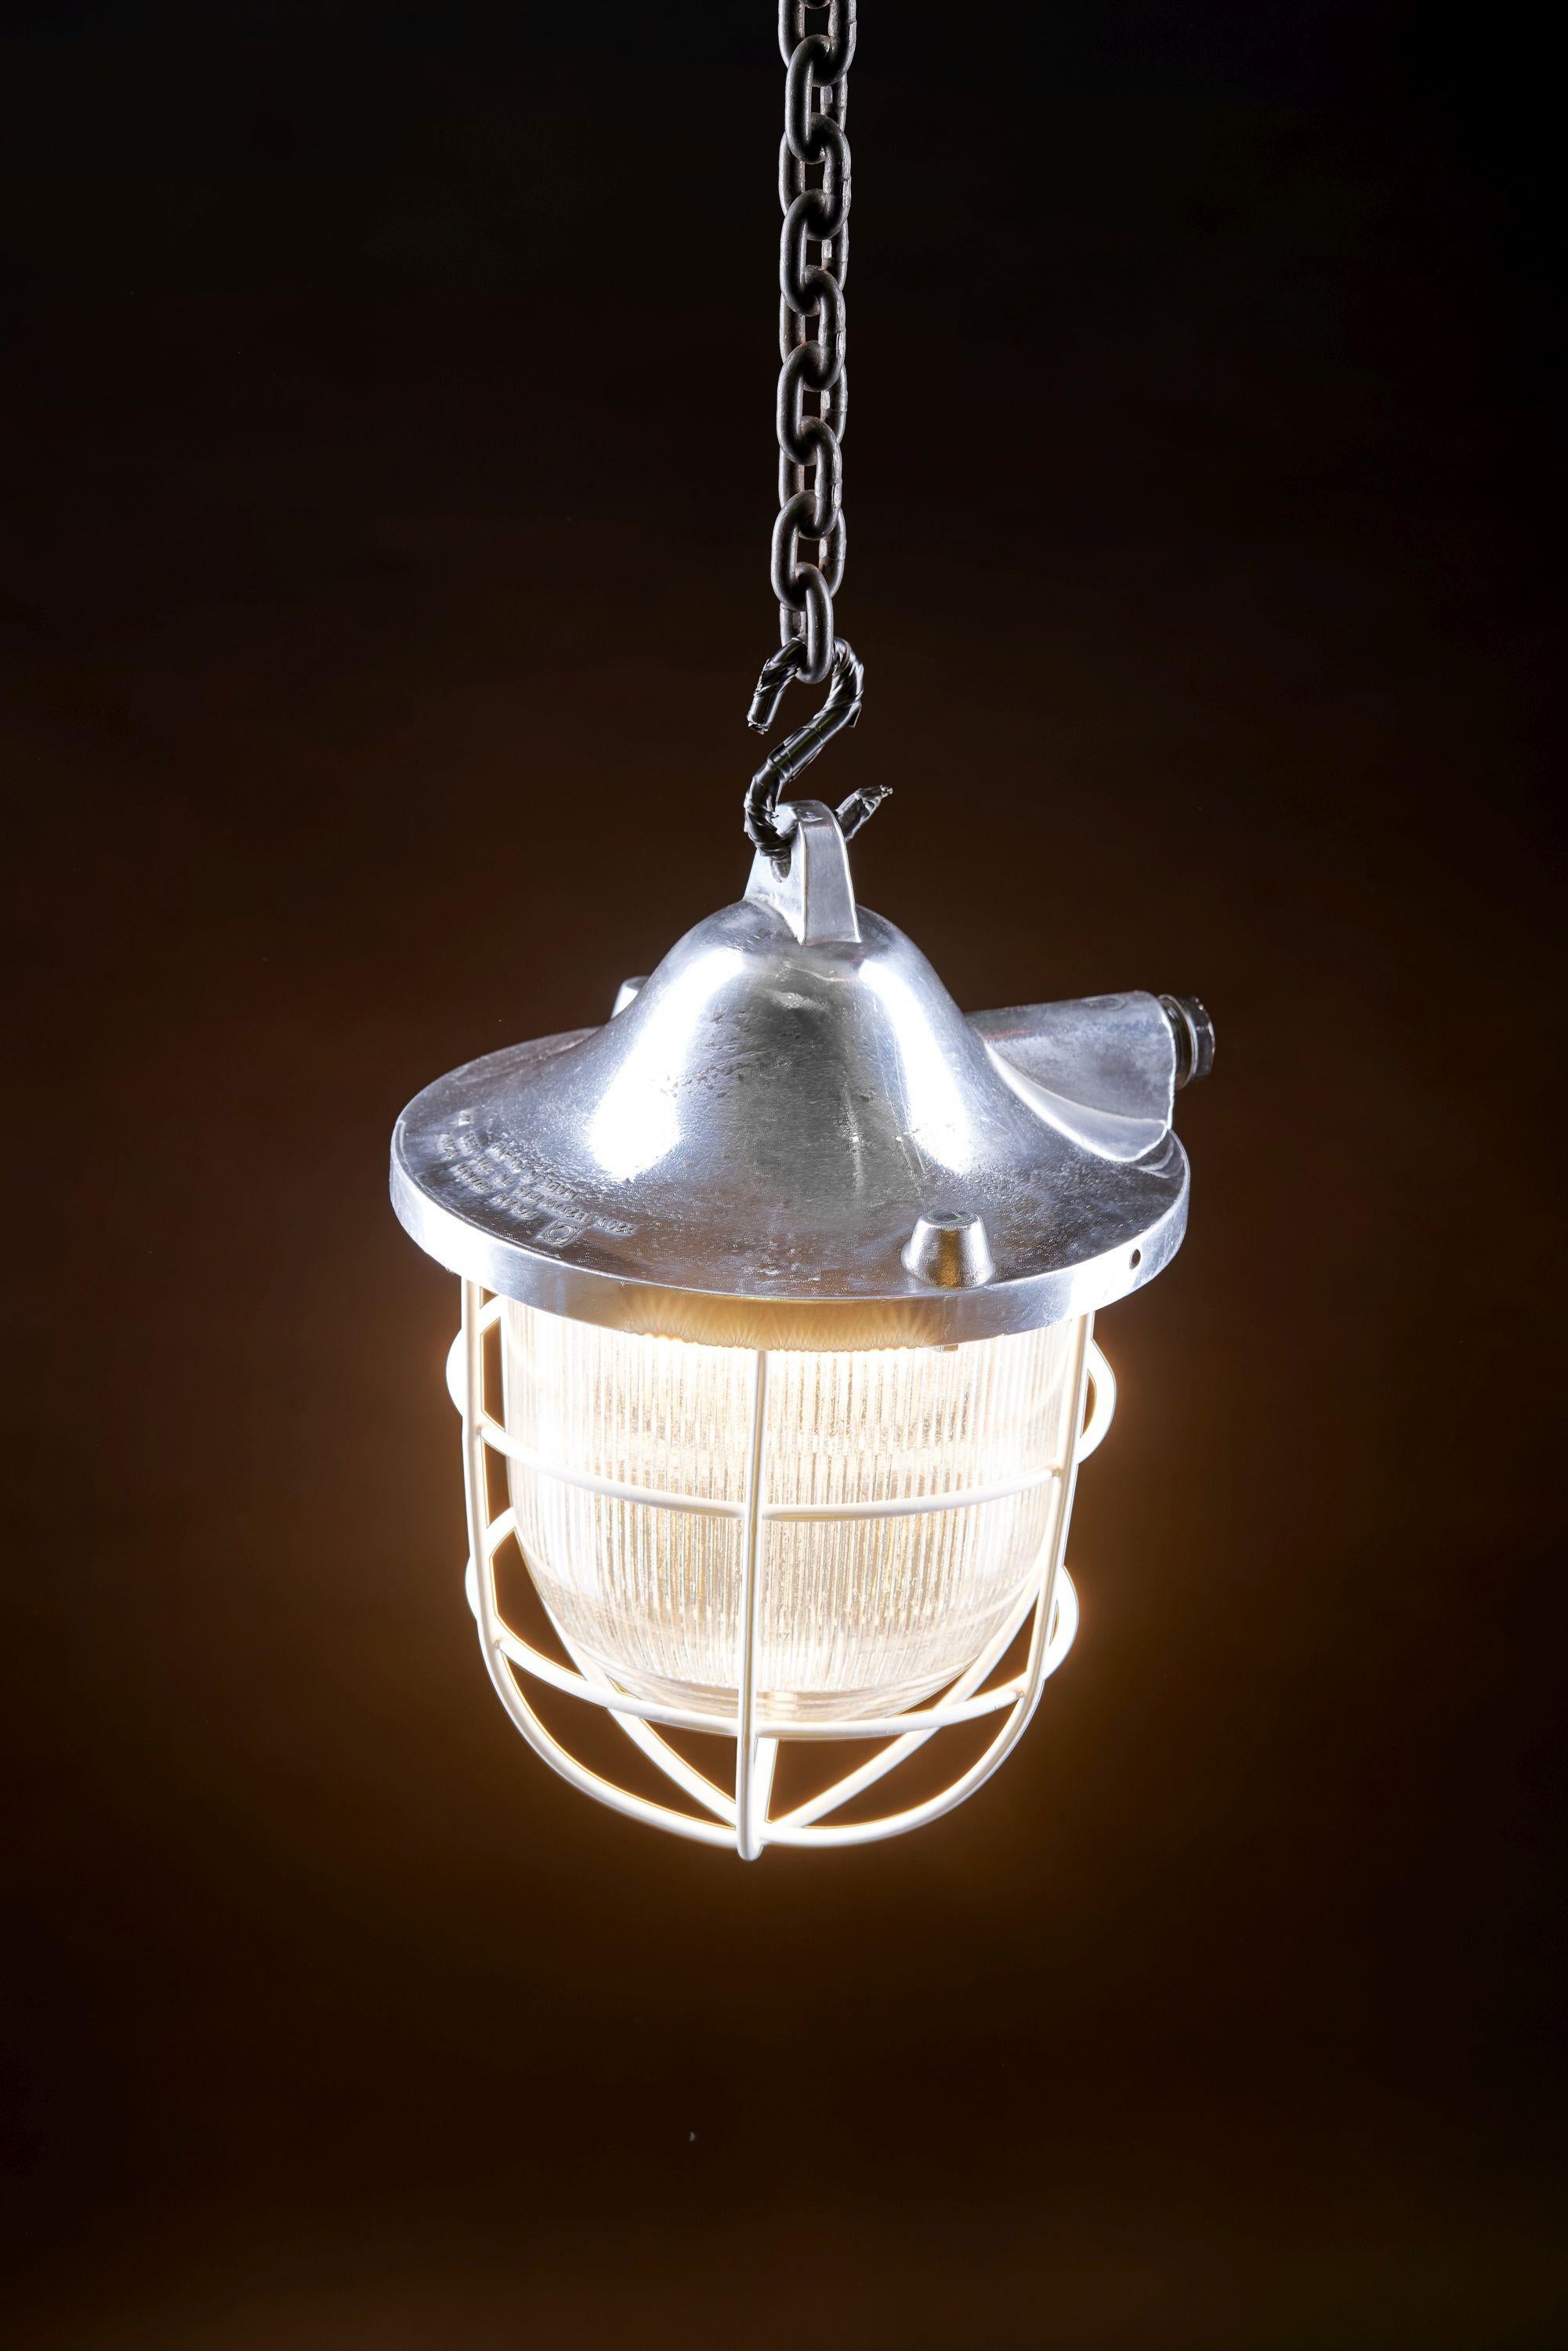 Primary use:

C-150 lamp was designed to illuminate factory premises, halls and workshops, mainly served as service and auxiliary lighting.

Manufacturer: POLAM – Gdansk
Time period: 1970s

Construction:

The body is made as an aluminium